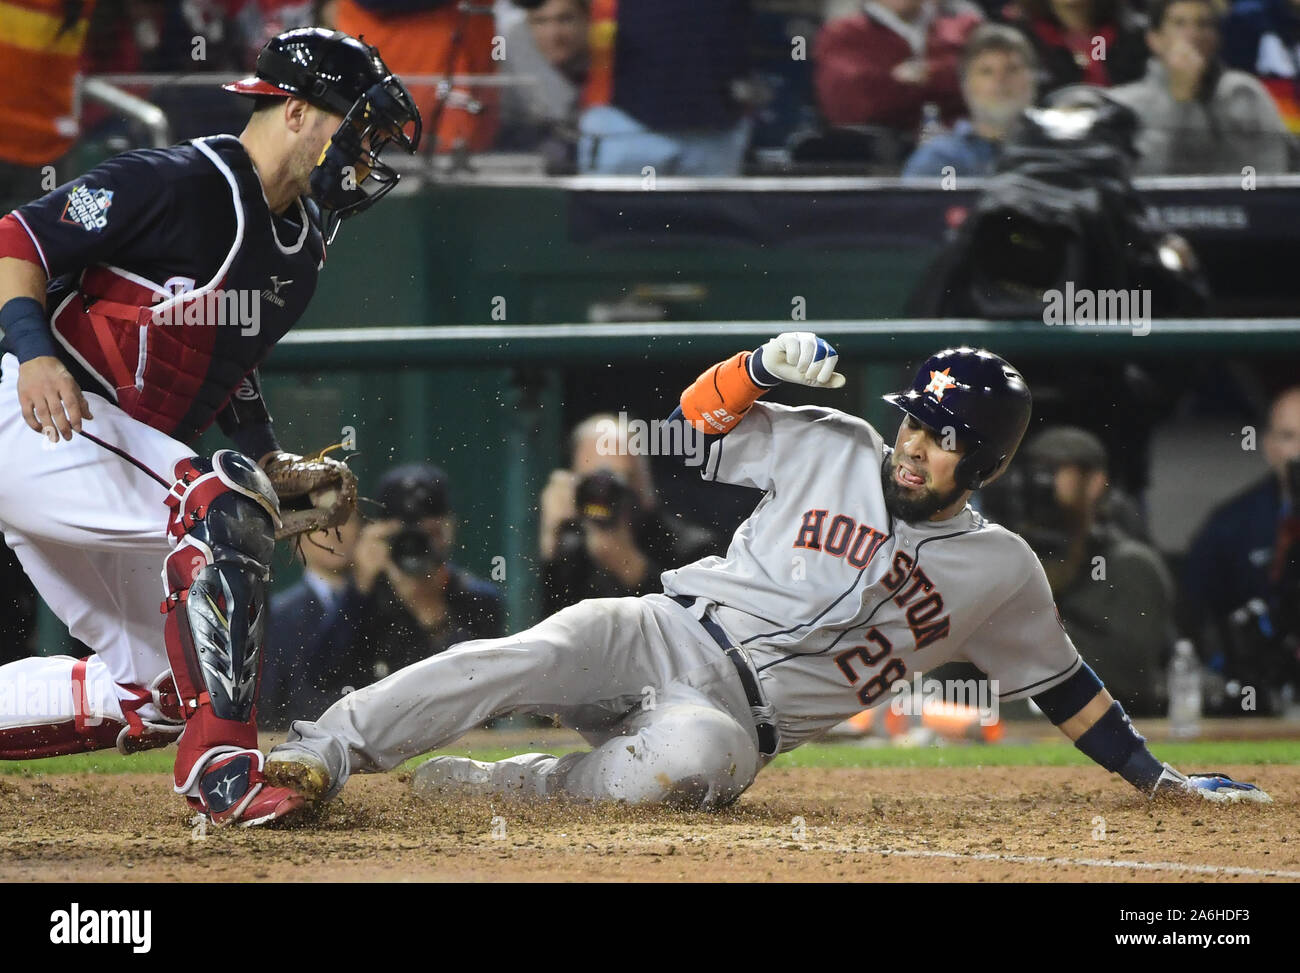 Washington, USA. 27th Oct, 2019. Washington Nationals catcher Yan Gomes tags out Houston Astros Robinson Chirinos to end the ninth inning in Game 4 of the 2019 World Series at Nationals Park in Washington, DC on Saturday, October 26, 2019. The Astros beat the Nationals 8-1 to even the series at two games apiece. Photo by Kevin Dietsch/UPI Credit: UPI/Alamy Live News Stock Photo